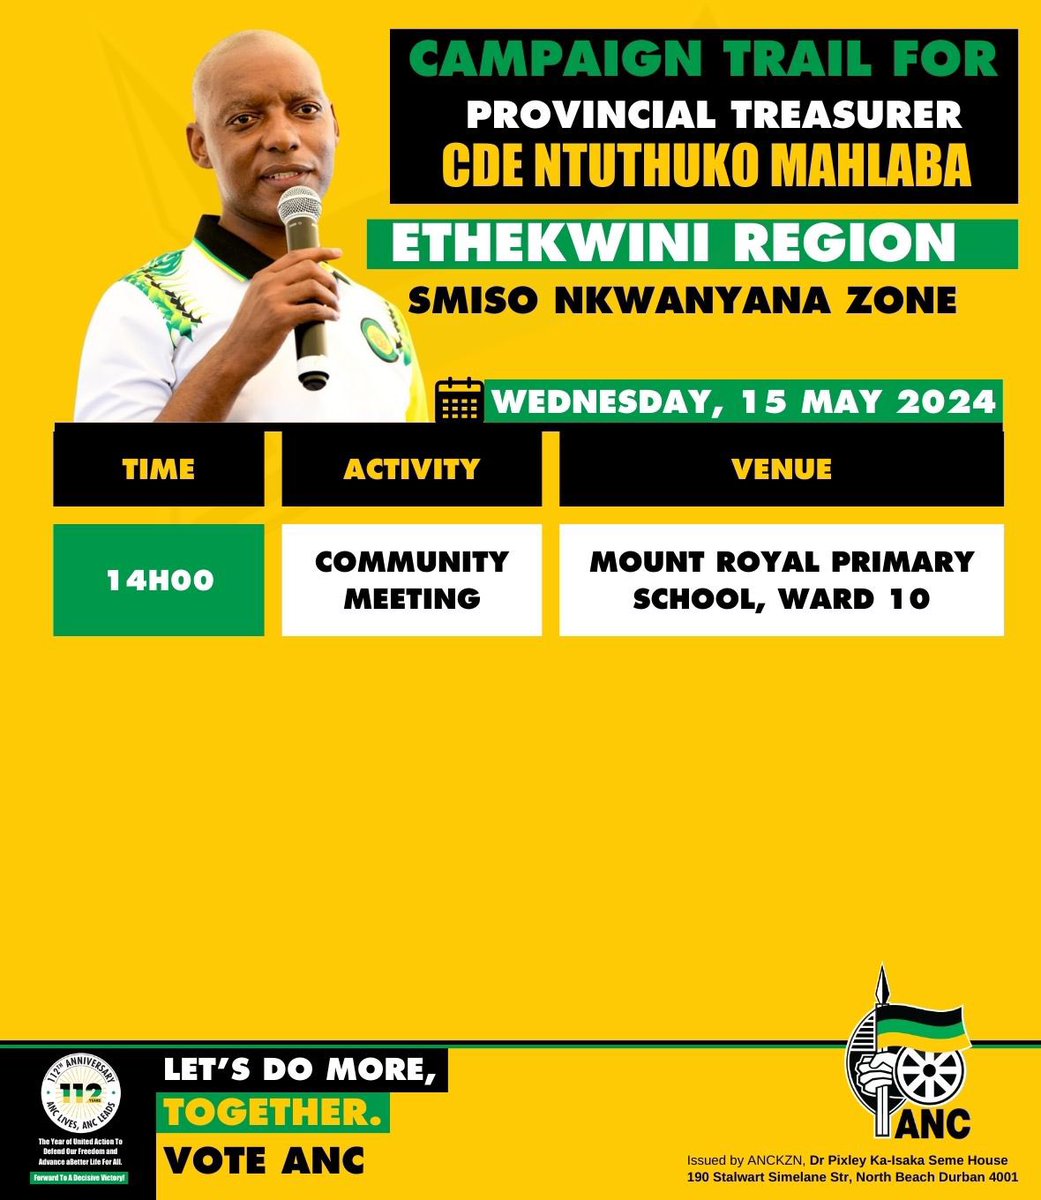 ON THE CAMPAIGN TRAIL ⚫️🟢🟡 ANC KZN Officials will be embarking on Door-to-Door campaigns and Community meetings in the eThekwini Region. #VoteANC2024 #LetsDoMoreTogether